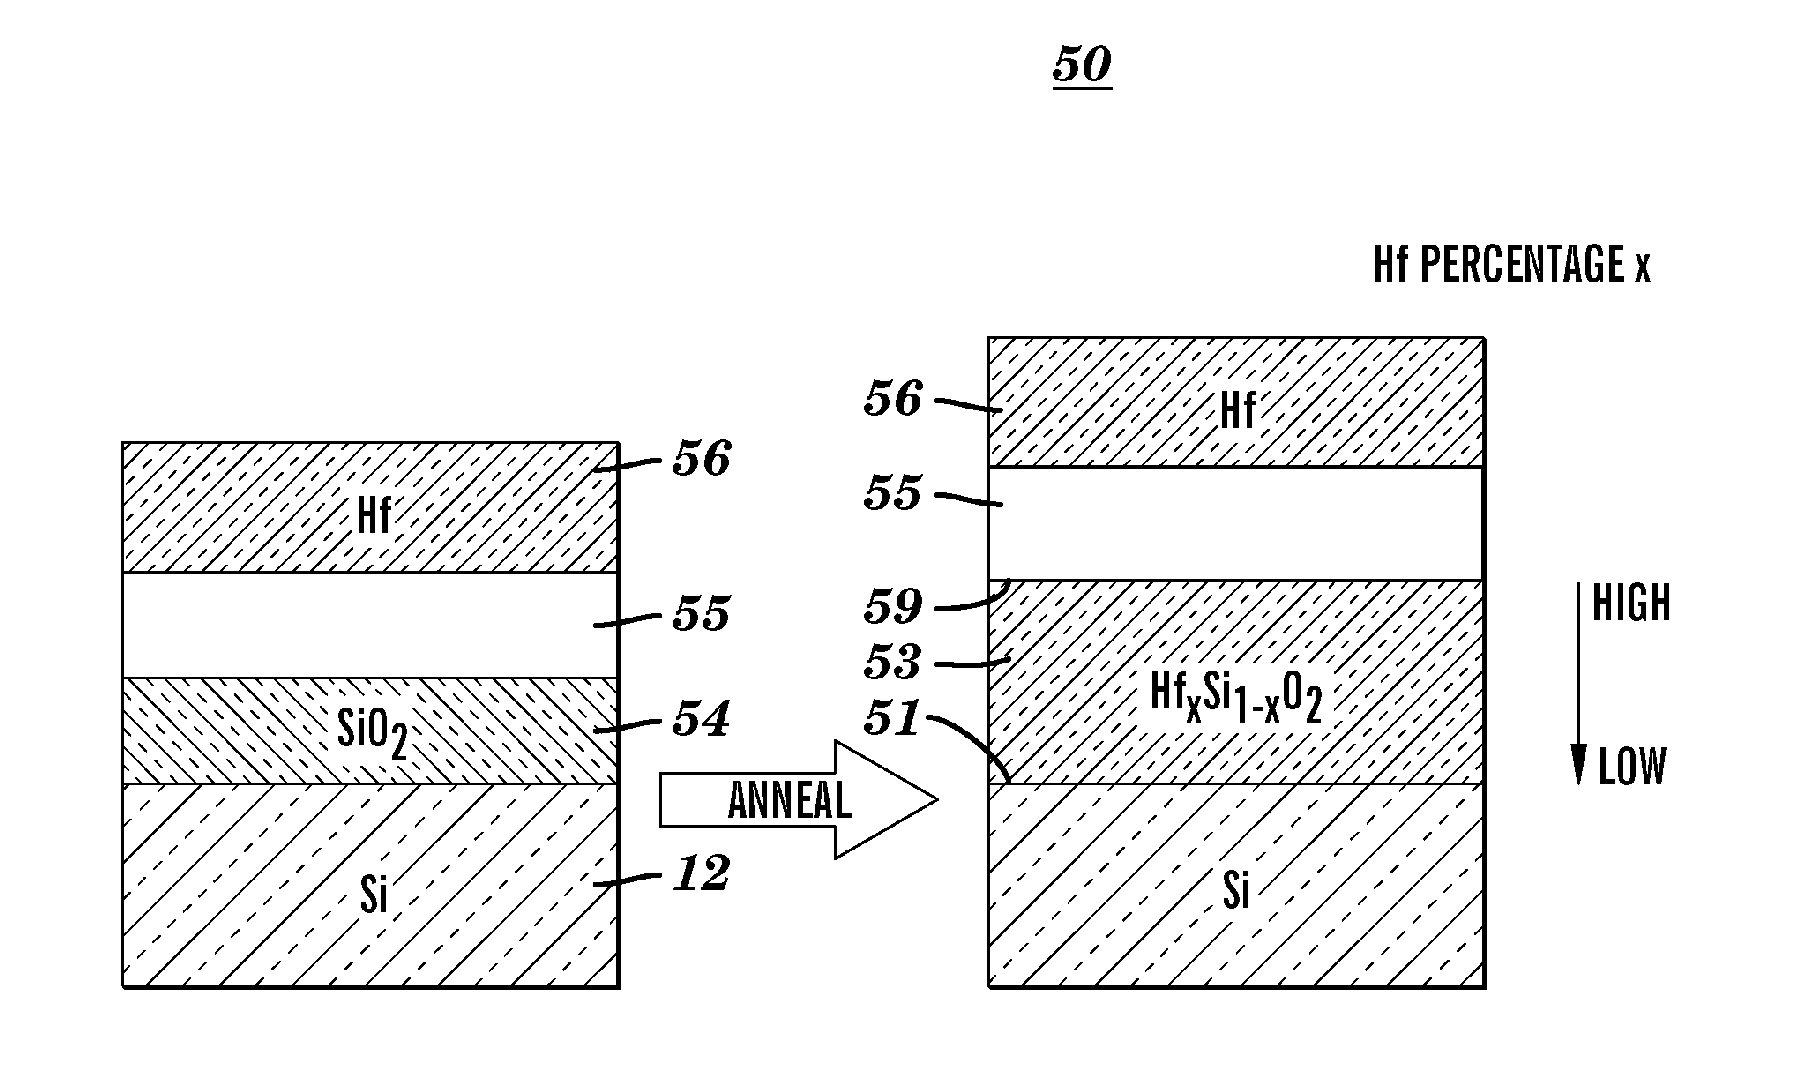 ULTRA-THIN Hf-DOPED-SILICON OXYNITRIDE FILM FOR HIGH PERFORMANCE CMOS APPLICATIONS AND METHOD OF MANUFACTURE